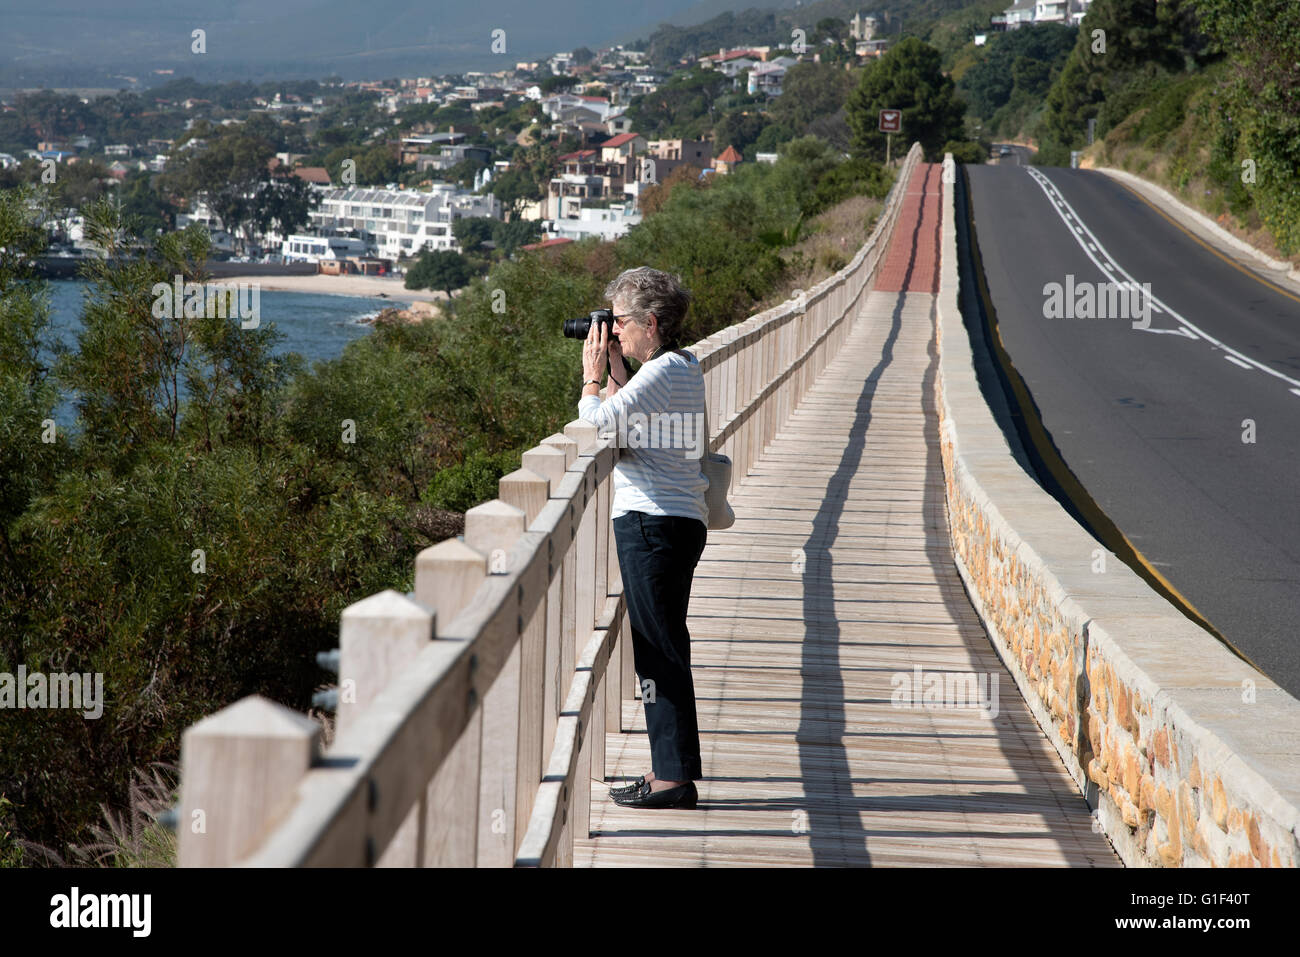 GORDON'S BAY WESTERN CAPE SOUTH AFRICA.  A pedestrian taking a photo from the walkway along the Whale watching coastal route Stock Photo